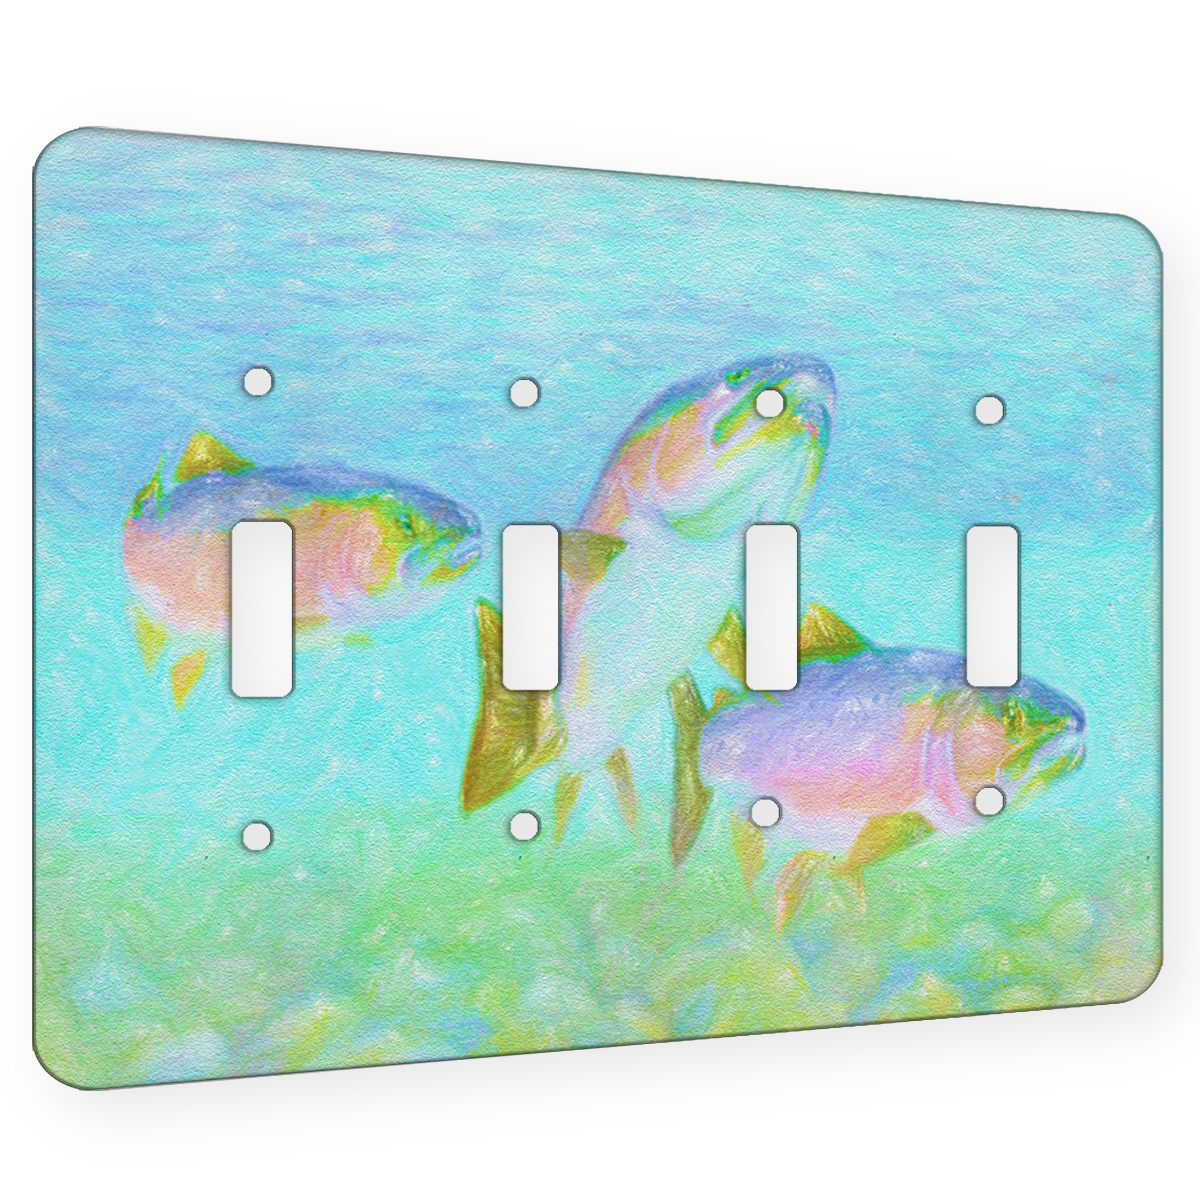 Atlantic Salmon – 4 Gang Switch Plate – ELEMENTS OF SPACE